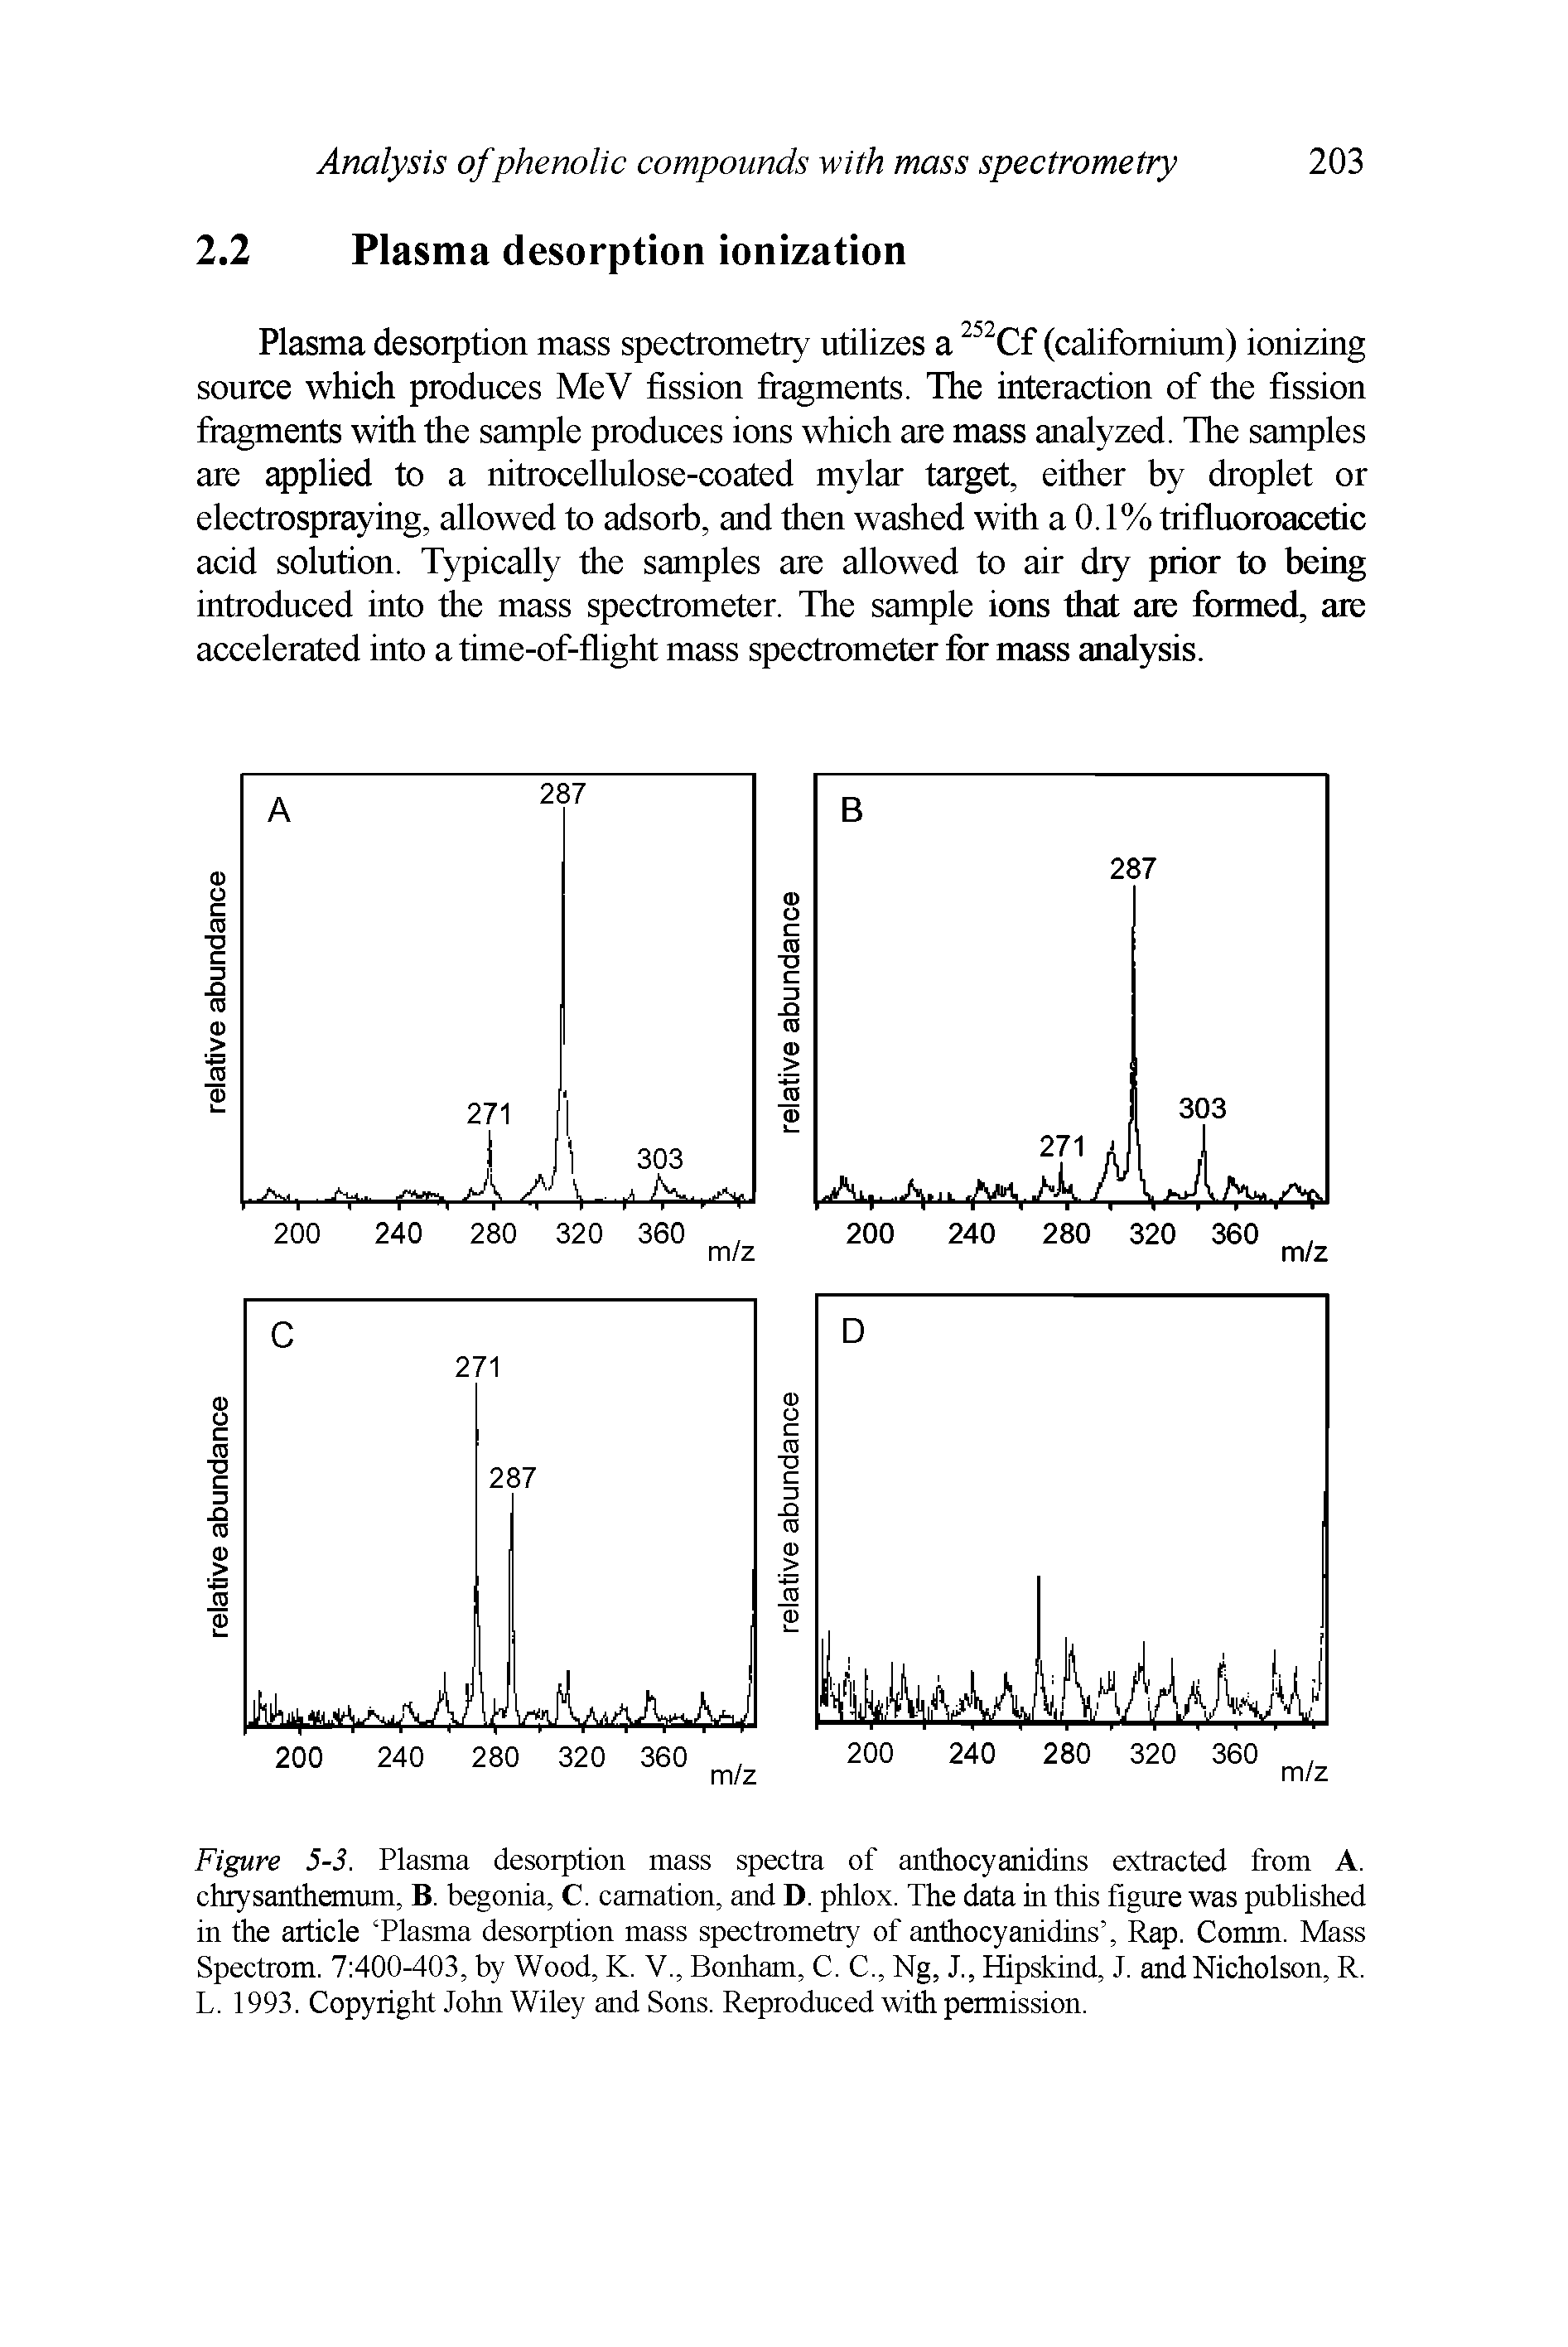 Figure 5-3. Plasma desorption mass spectra of anthocyanidins extracted from A. chrysanthemum, B. begonia, C. carnation, and D. phlox. The data in this figure was published in the article Plasma desorption mass spectrometry of anthocyanidins , Rap. Comm. Mass Spectrom. 7 400-403, by Wood, K. V., Bonham, C. C., Ng, J., Hipskind, J. and Nicholson, R. L. 1993. Copyright John Wiley and Sons. Reproduced with permission.